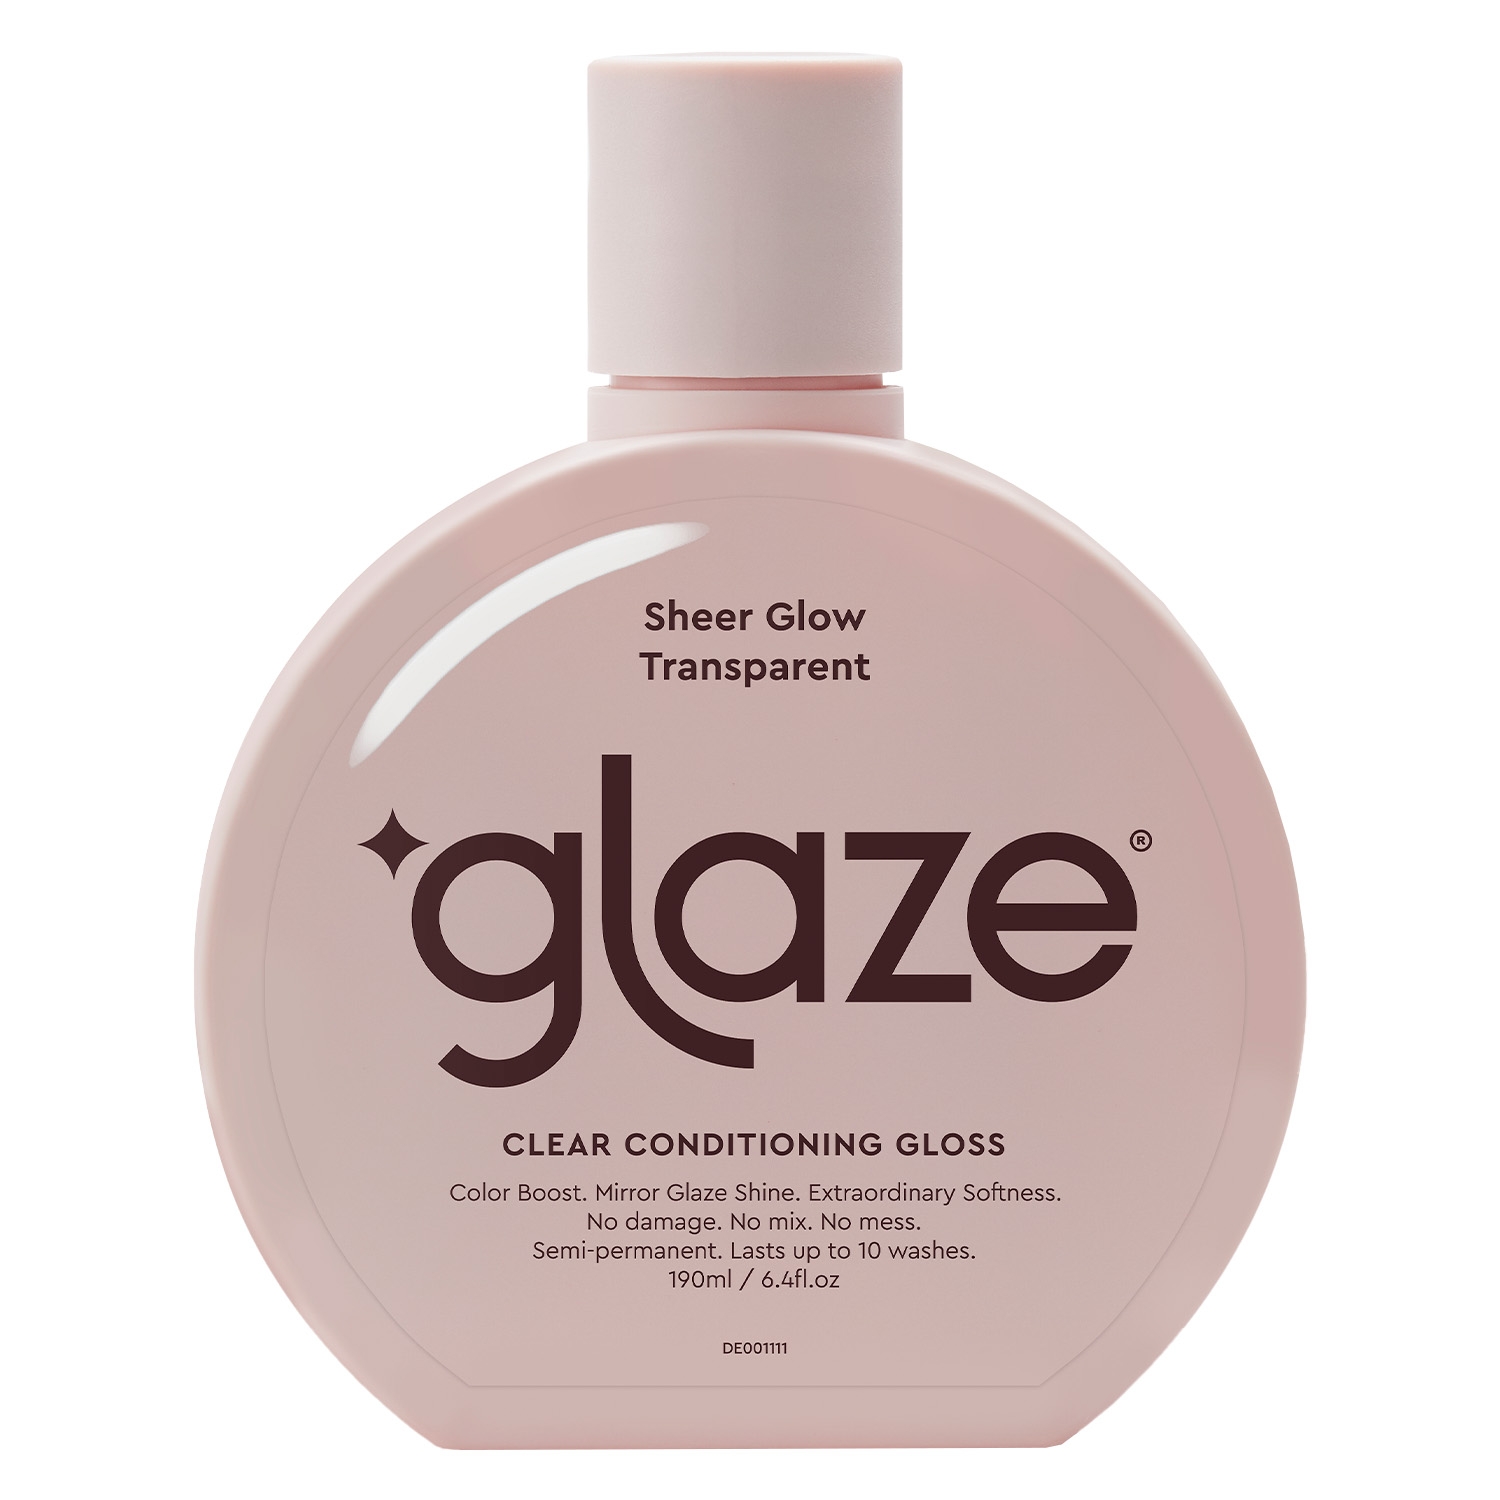 Product image from Glaze - Color Conditioning Gloss Sheer Glow